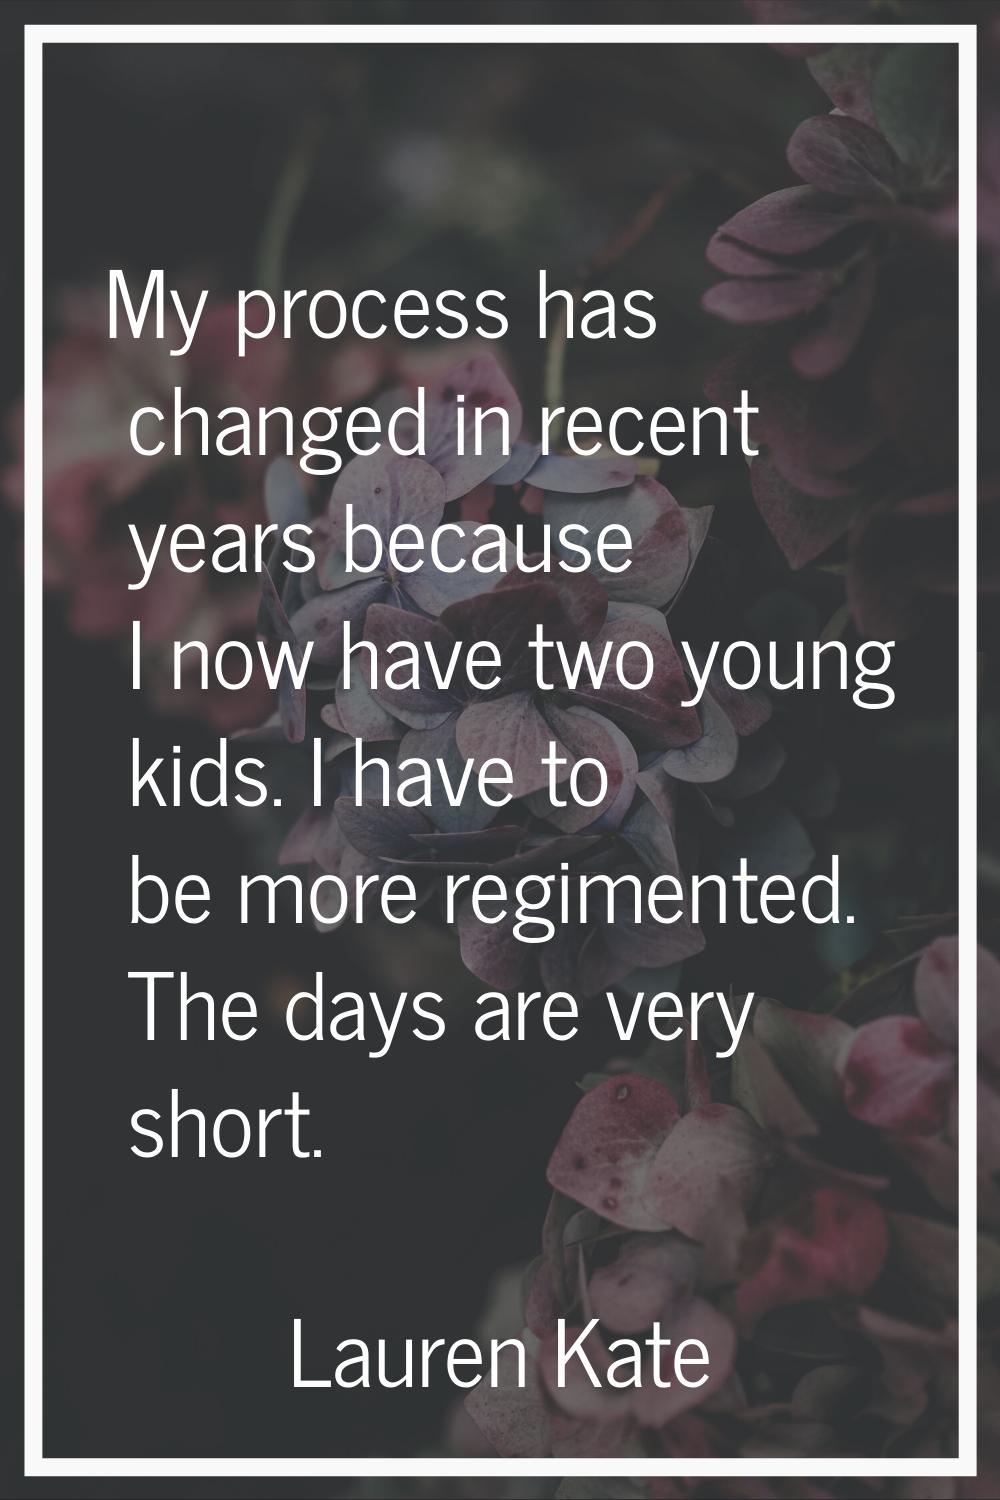 My process has changed in recent years because I now have two young kids. I have to be more regimen